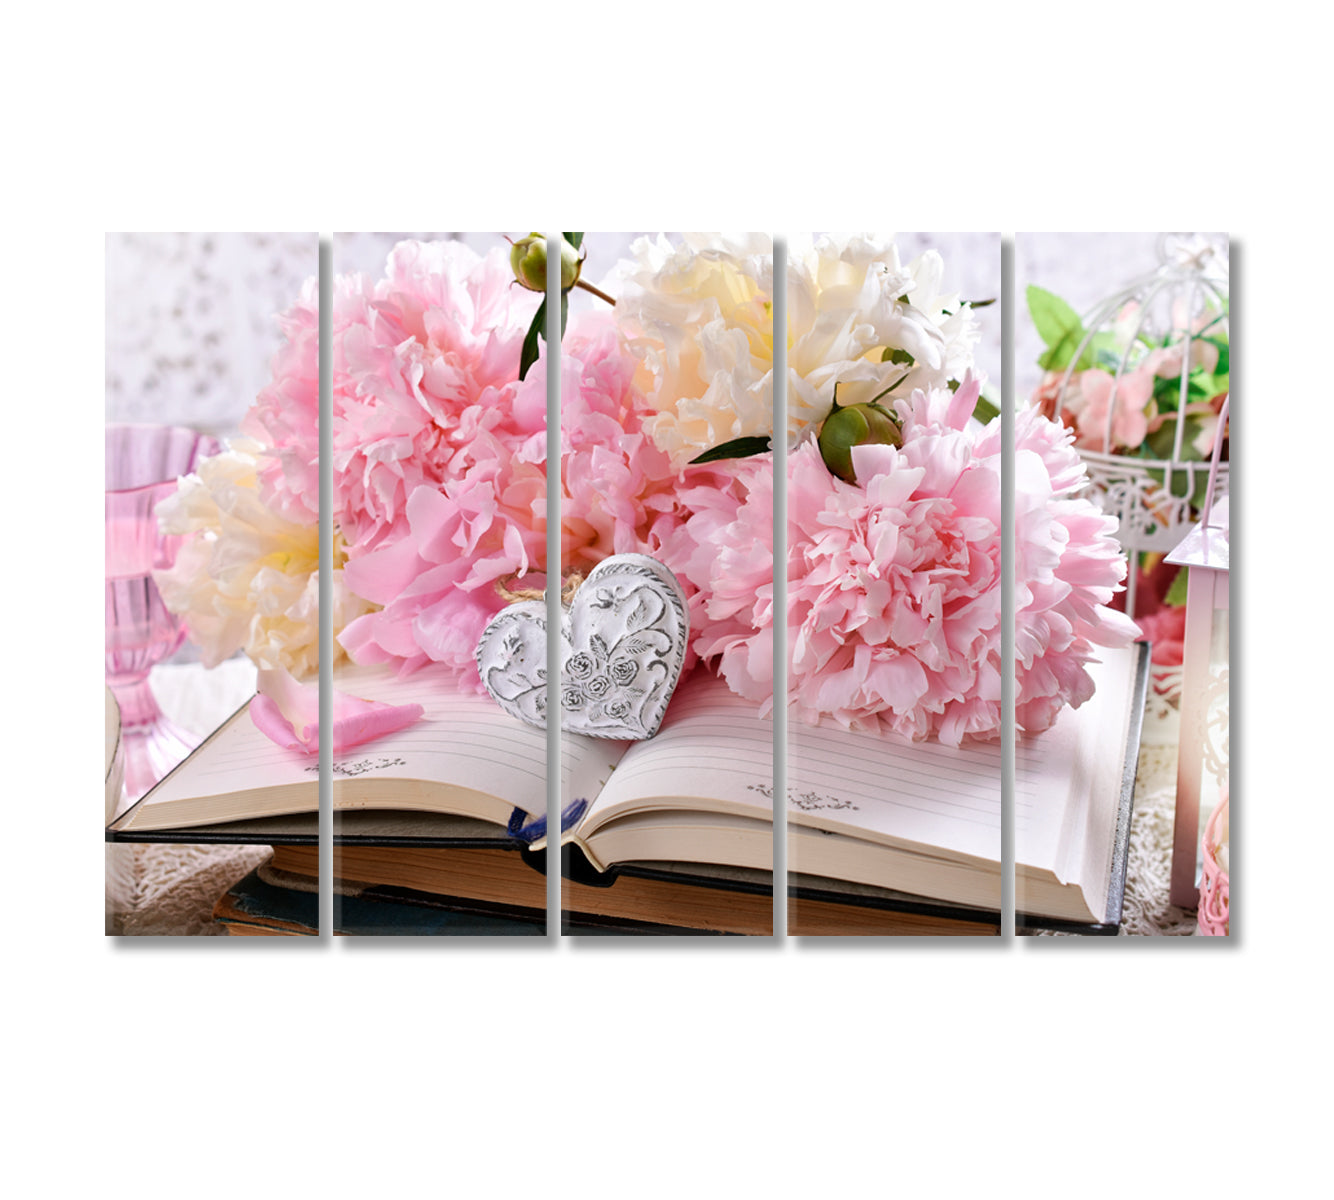 Beautiful Shabby Chic Style Pink Peonies and Old Books Canvas Print-Canvas Print-CetArt-5 Panels-36x24 inches-CetArt